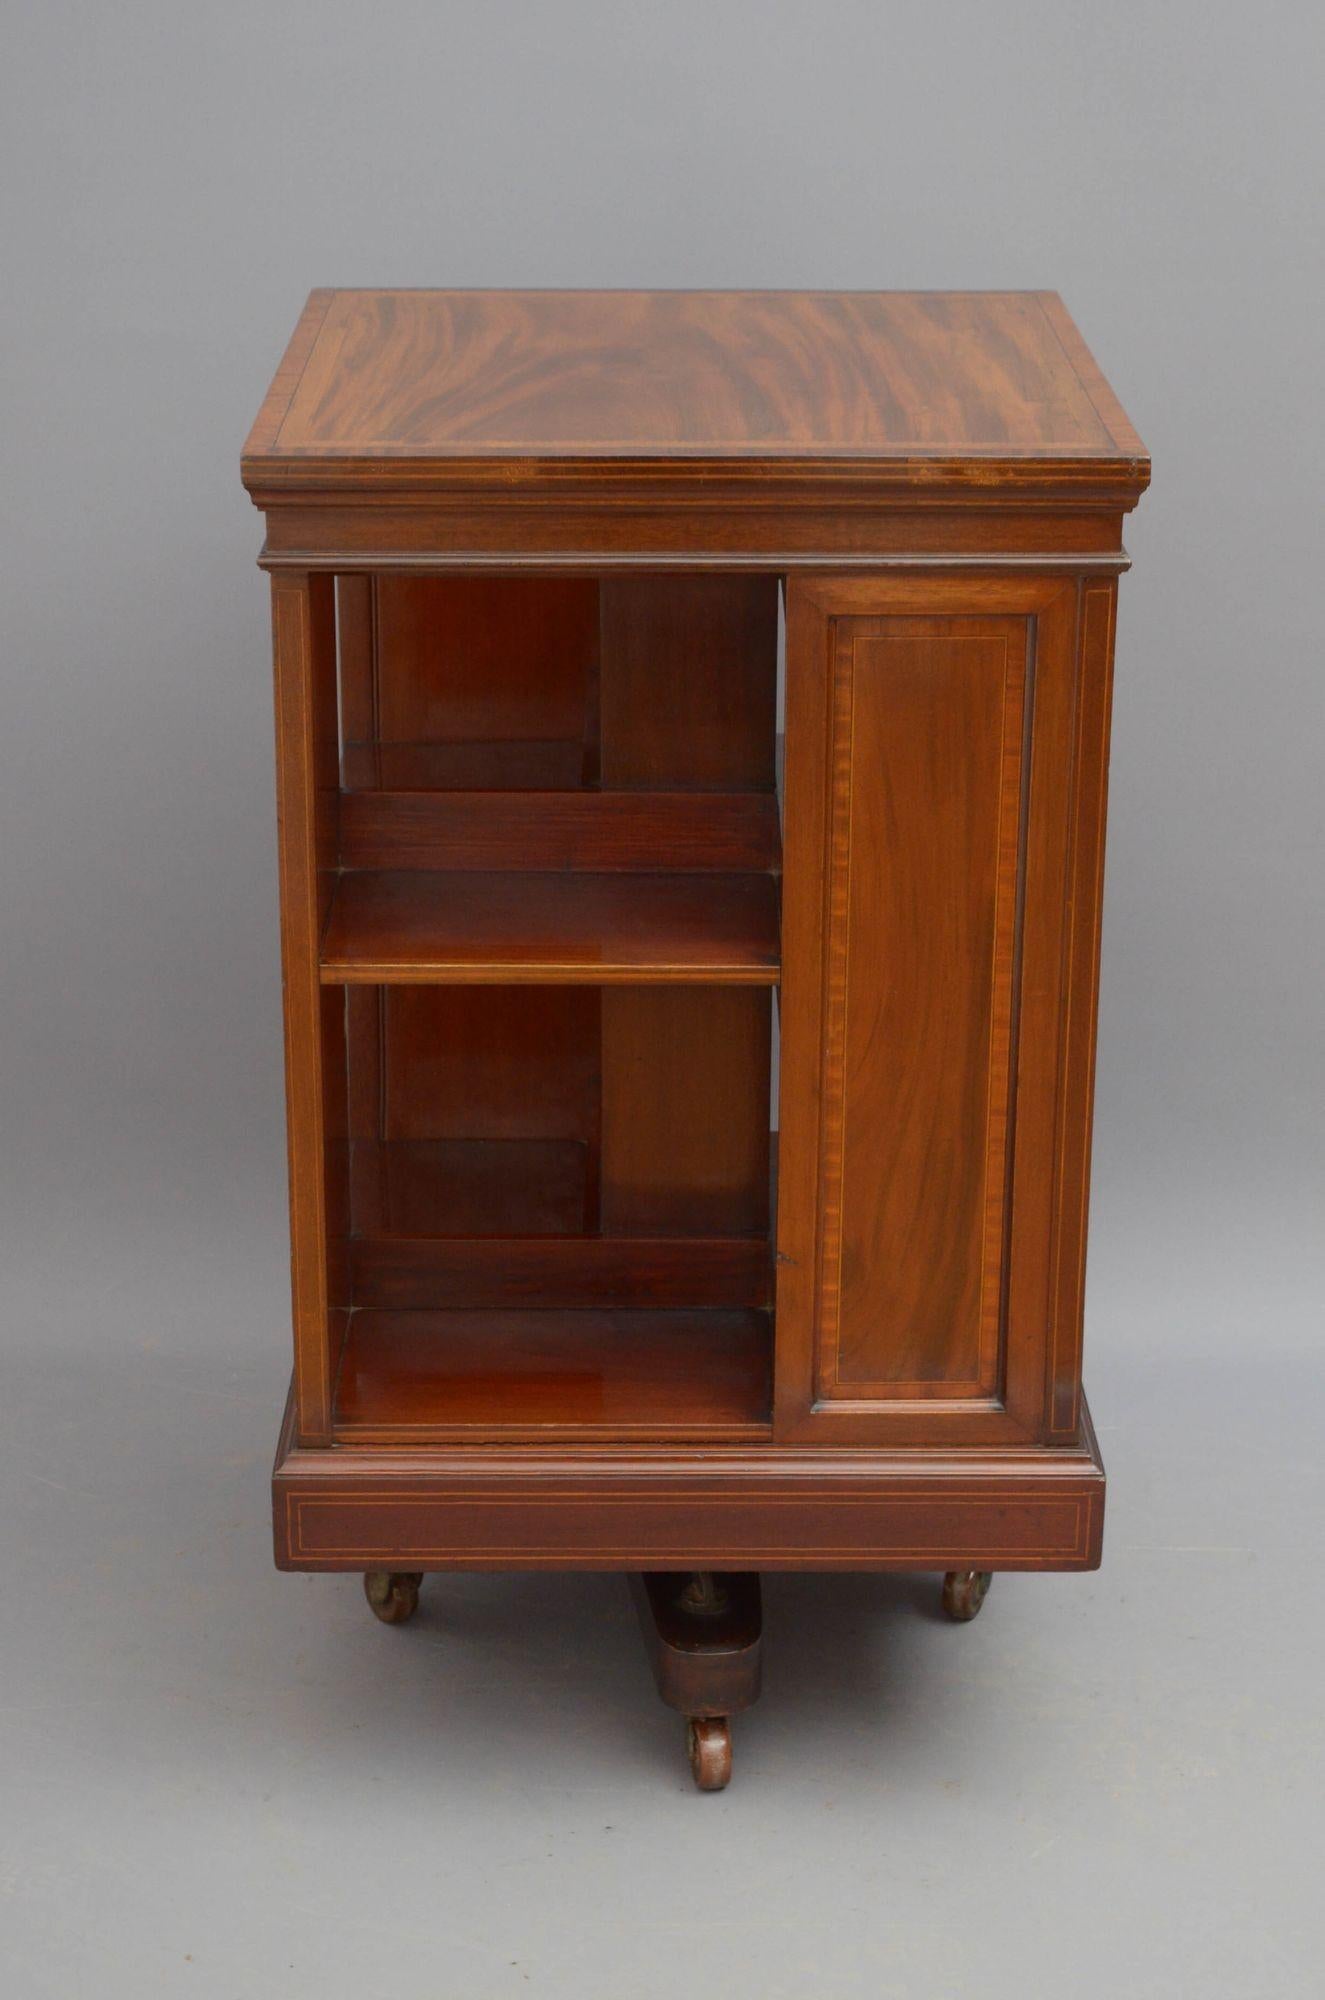 Edwardian Mahogany Revolving Bookcase In Good Condition For Sale In Whaley Bridge, GB